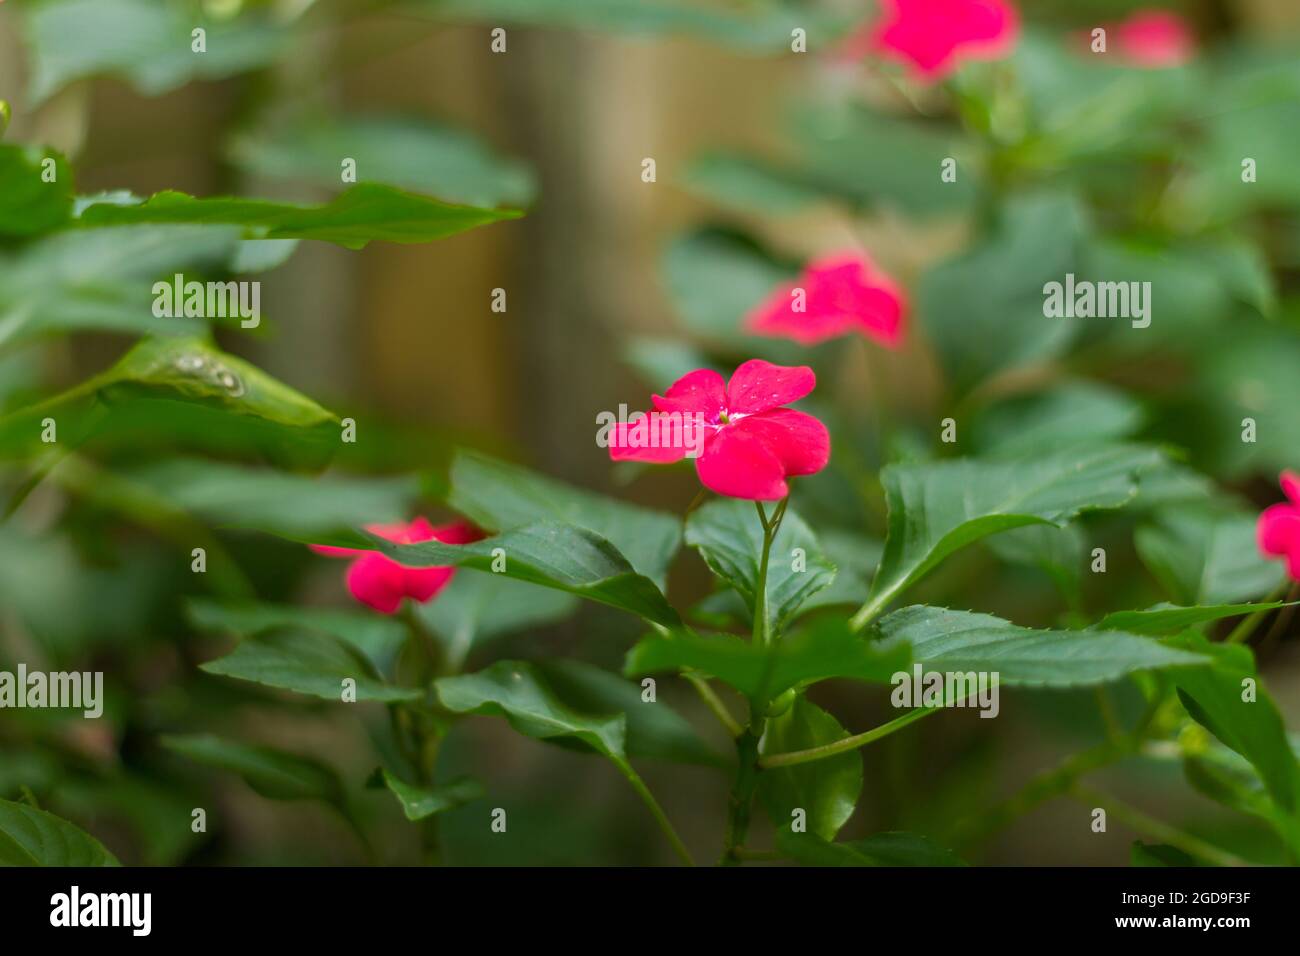 Impatiens balsamina, commonly known as balsam, garden balsam, rose balsam, touch-me-not or spotted snapweed, is a species of plant native to India Stock Photo